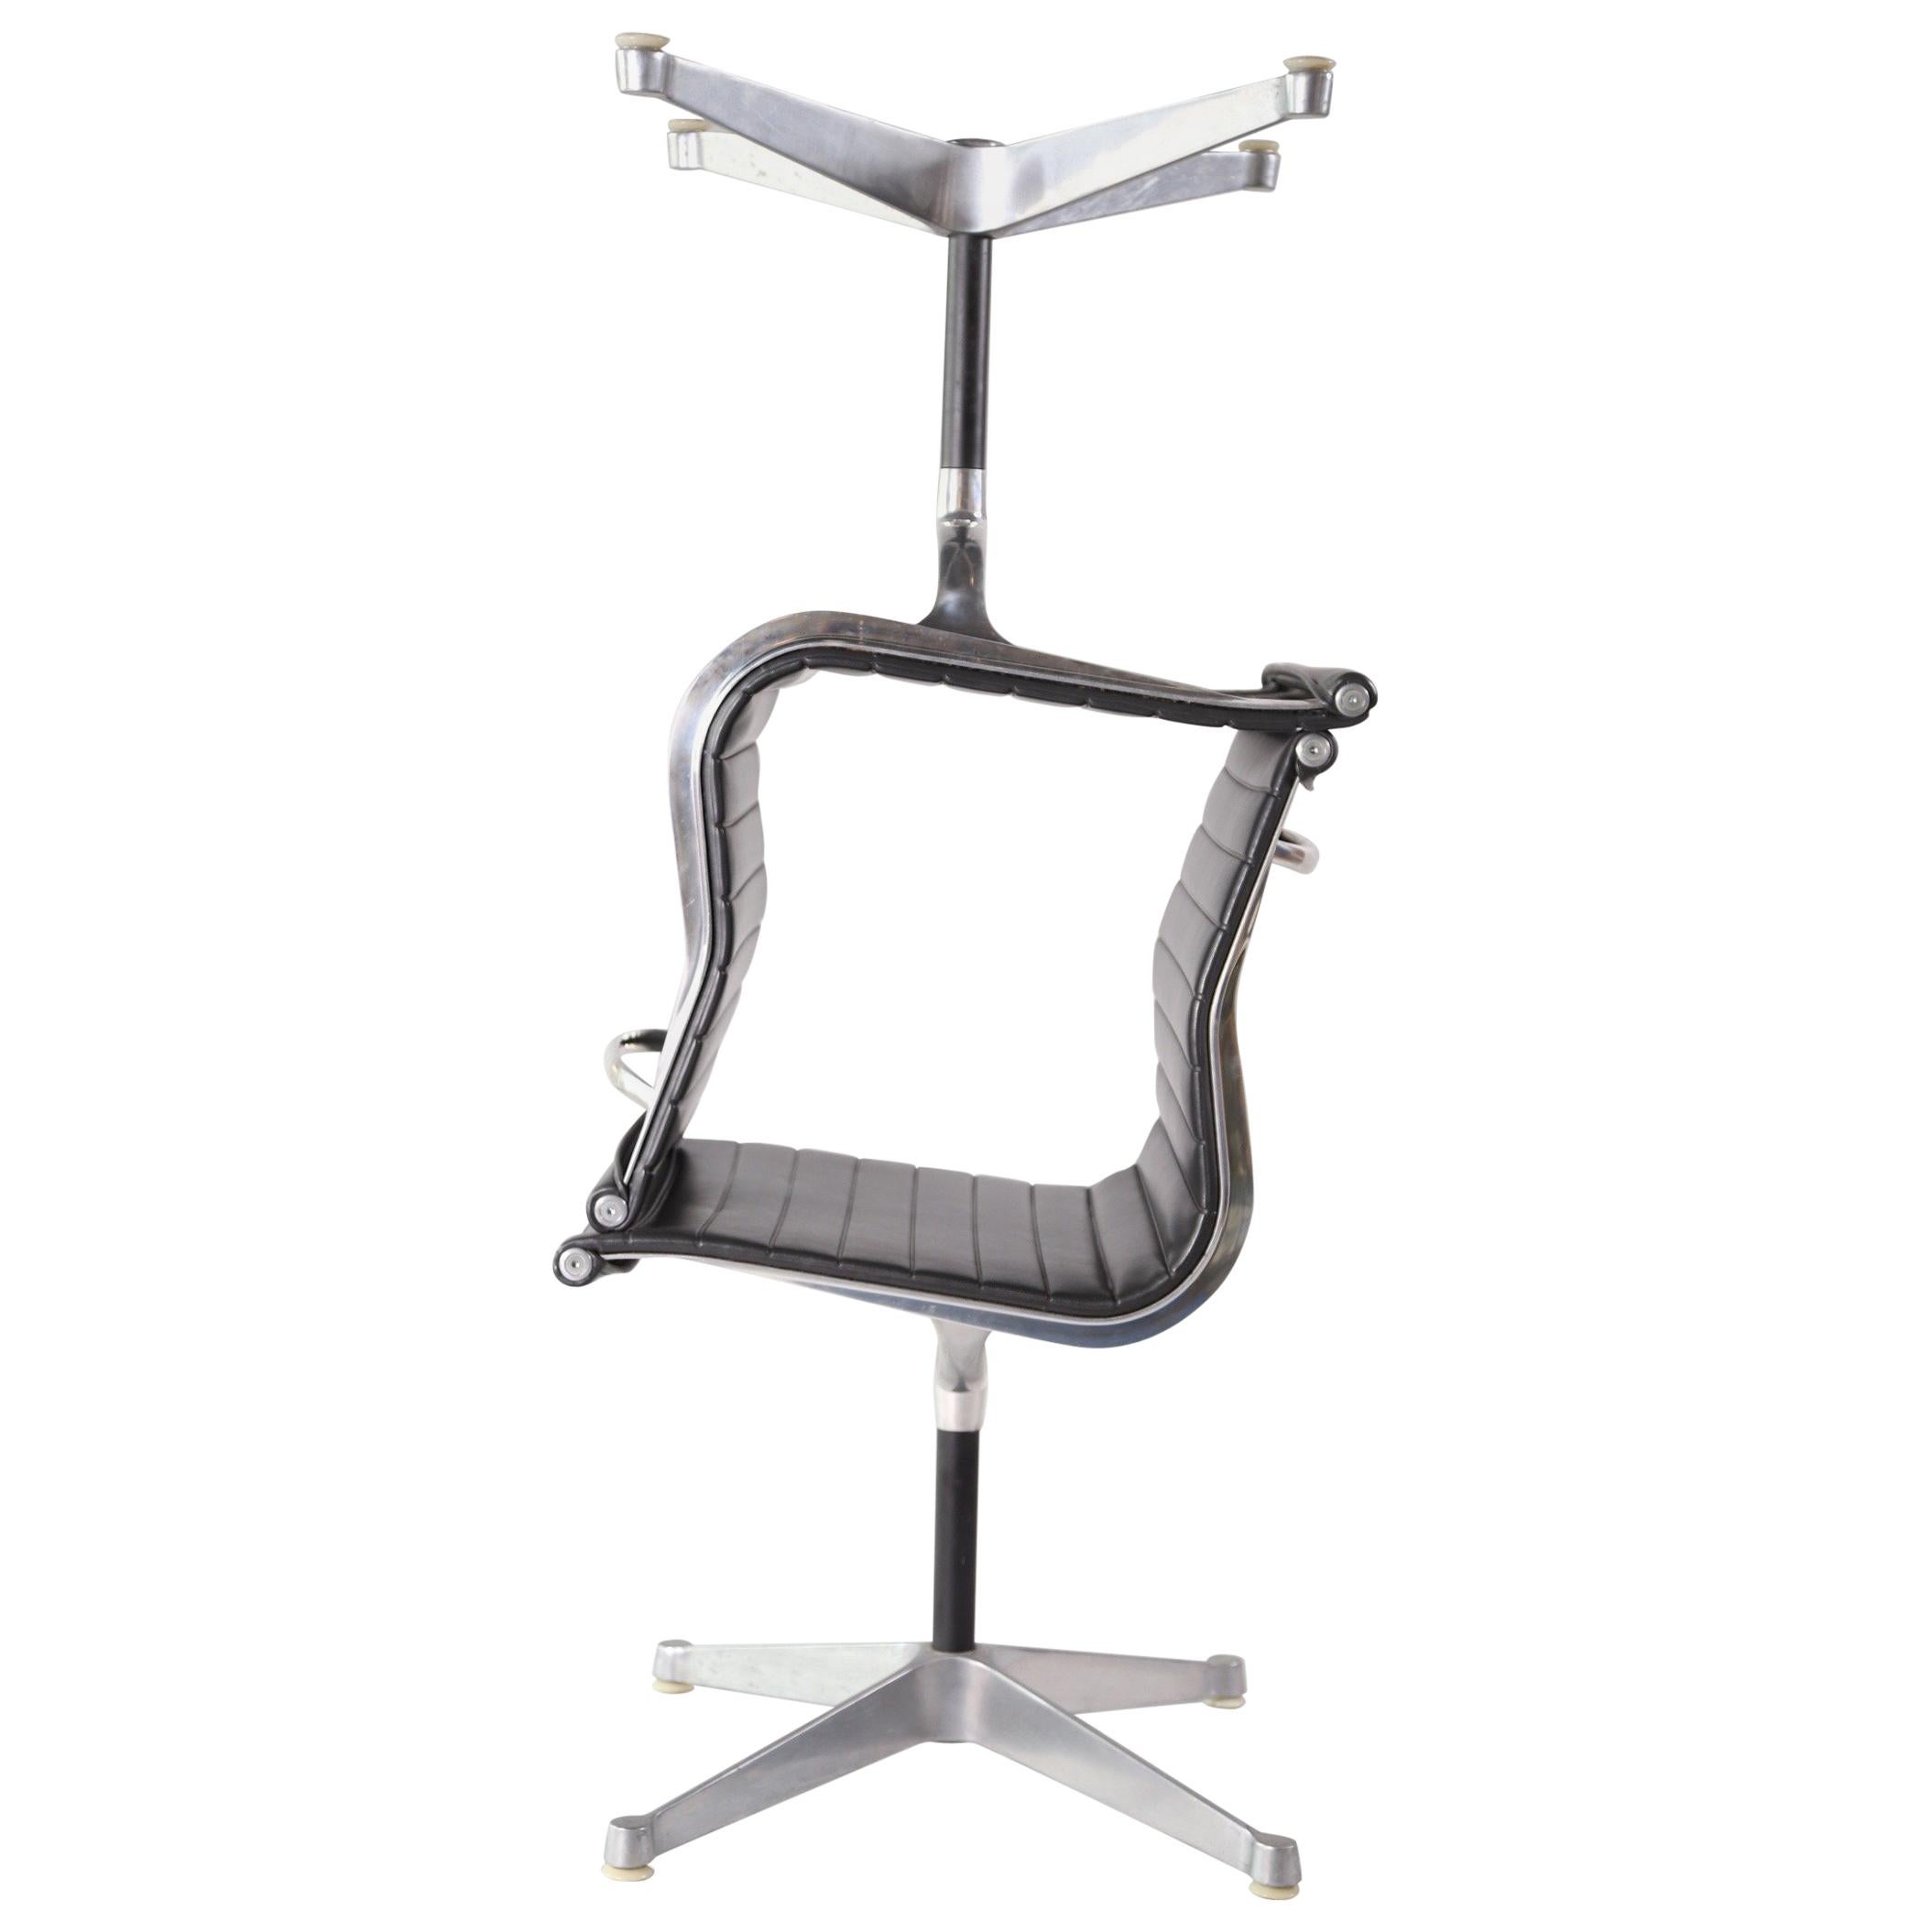 Aluminum Group Chairs by Eames for Herman Miller